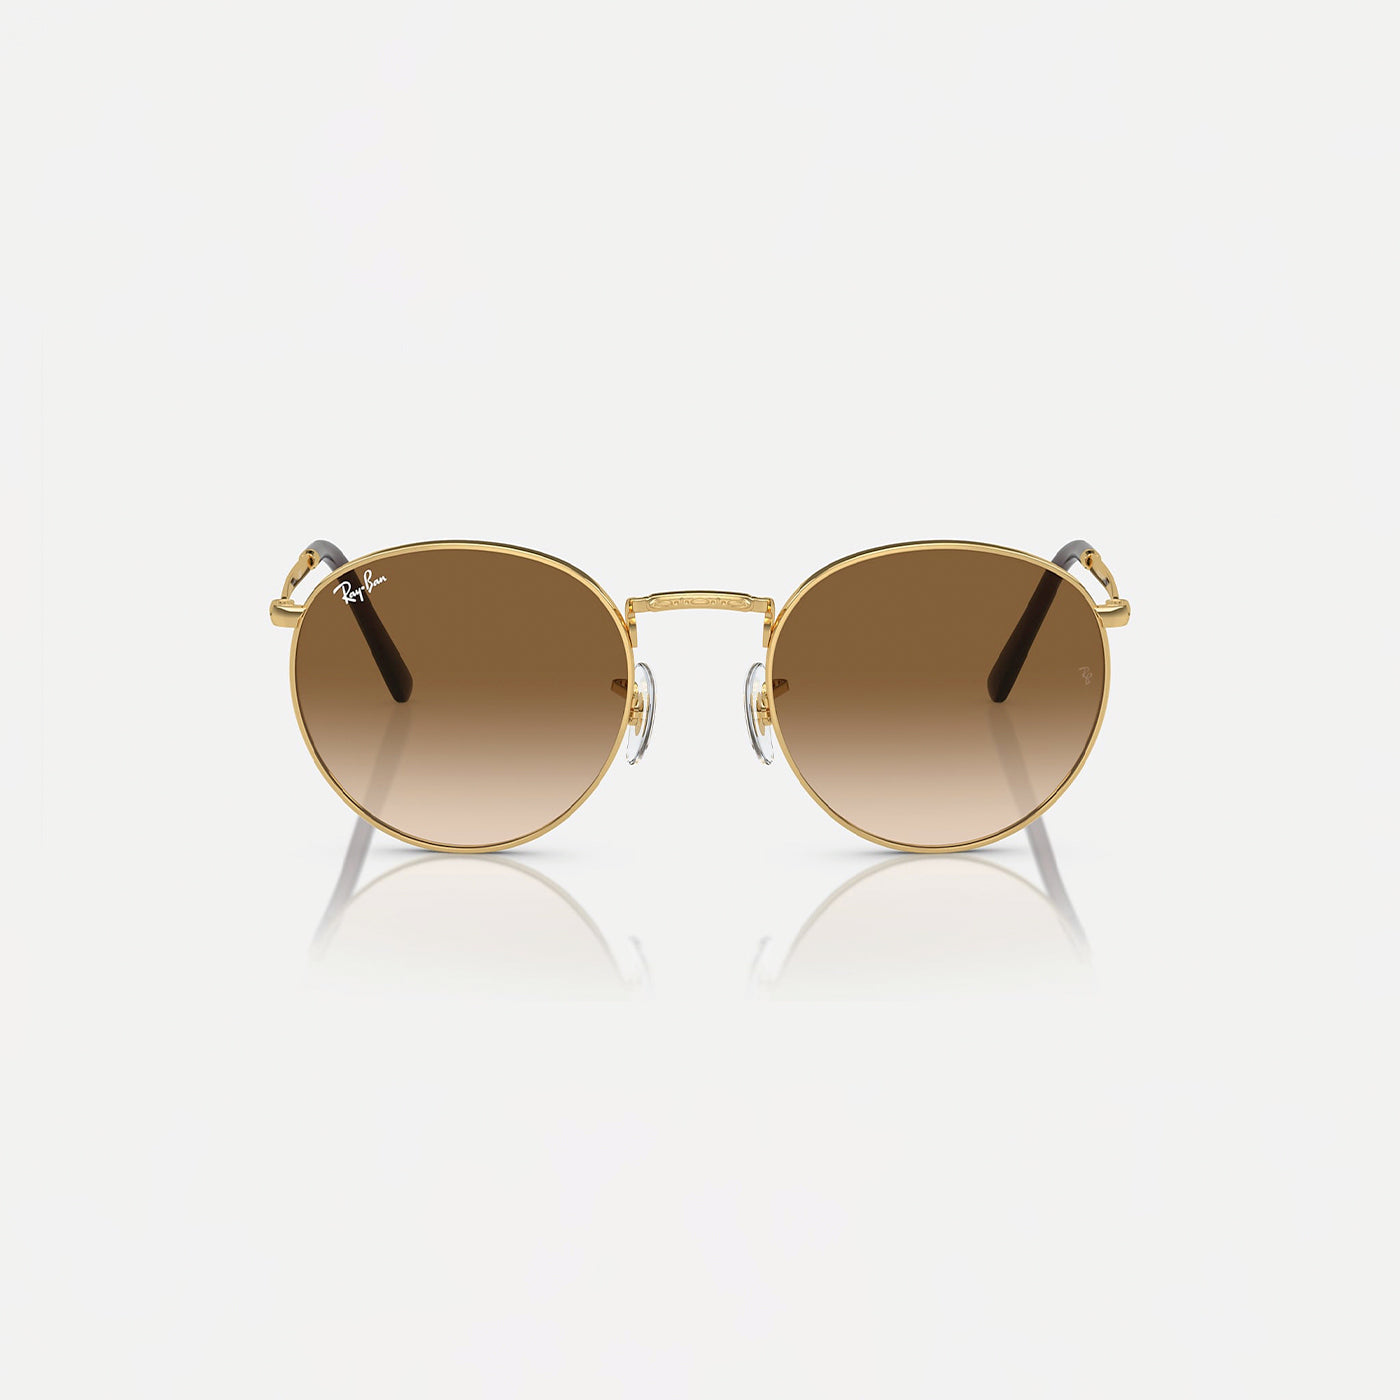 Ray-Ban - New Round RB3637 - Arista Gold Frame / Brown Gradient Lens - 50